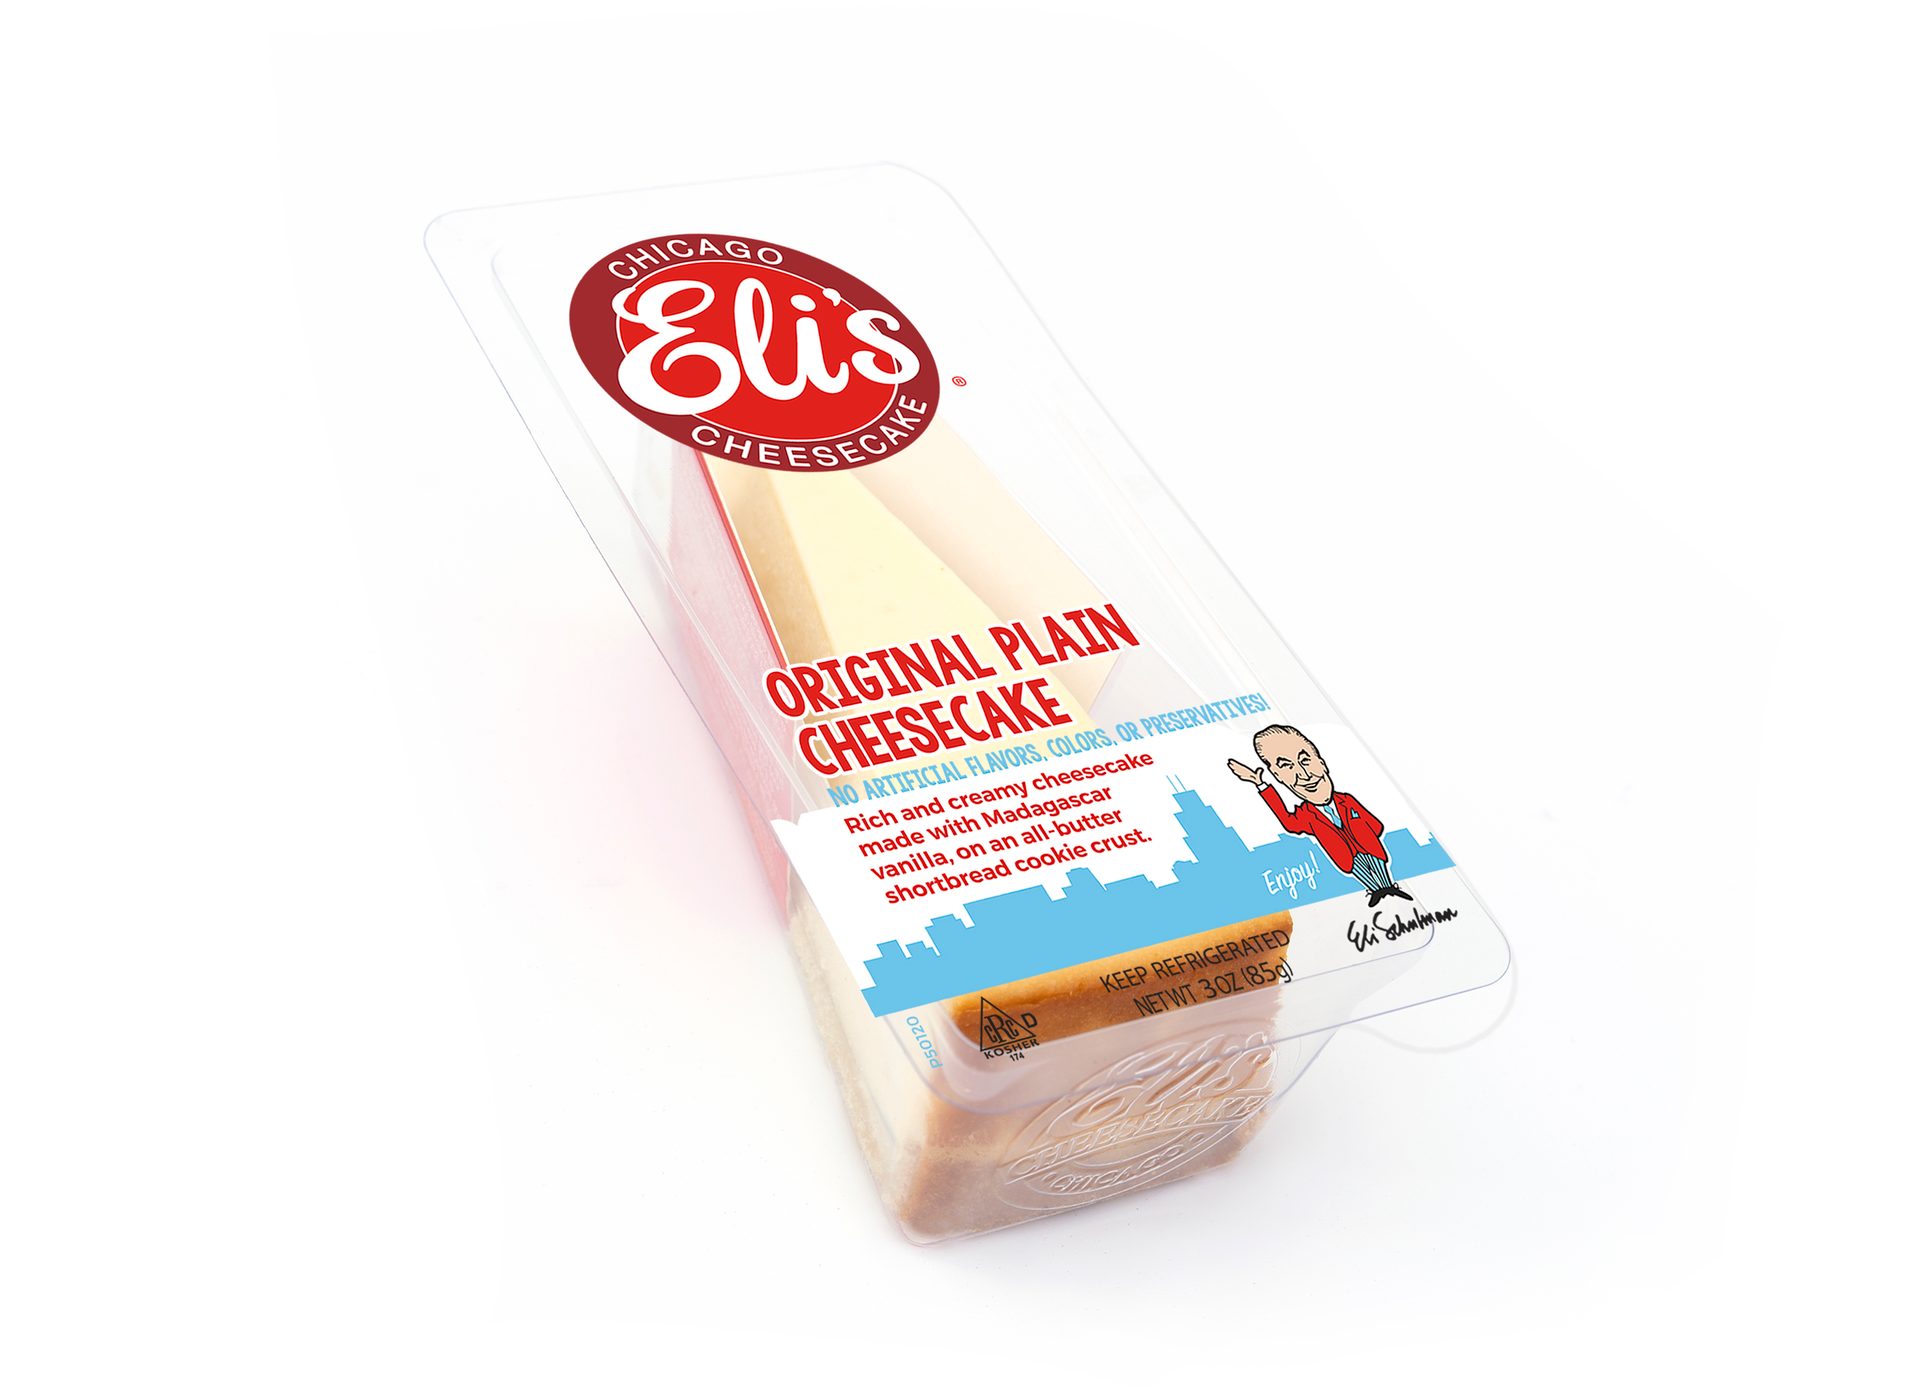 Packaging, Clear plastic, Logo, Cheesecake slice, Illustration